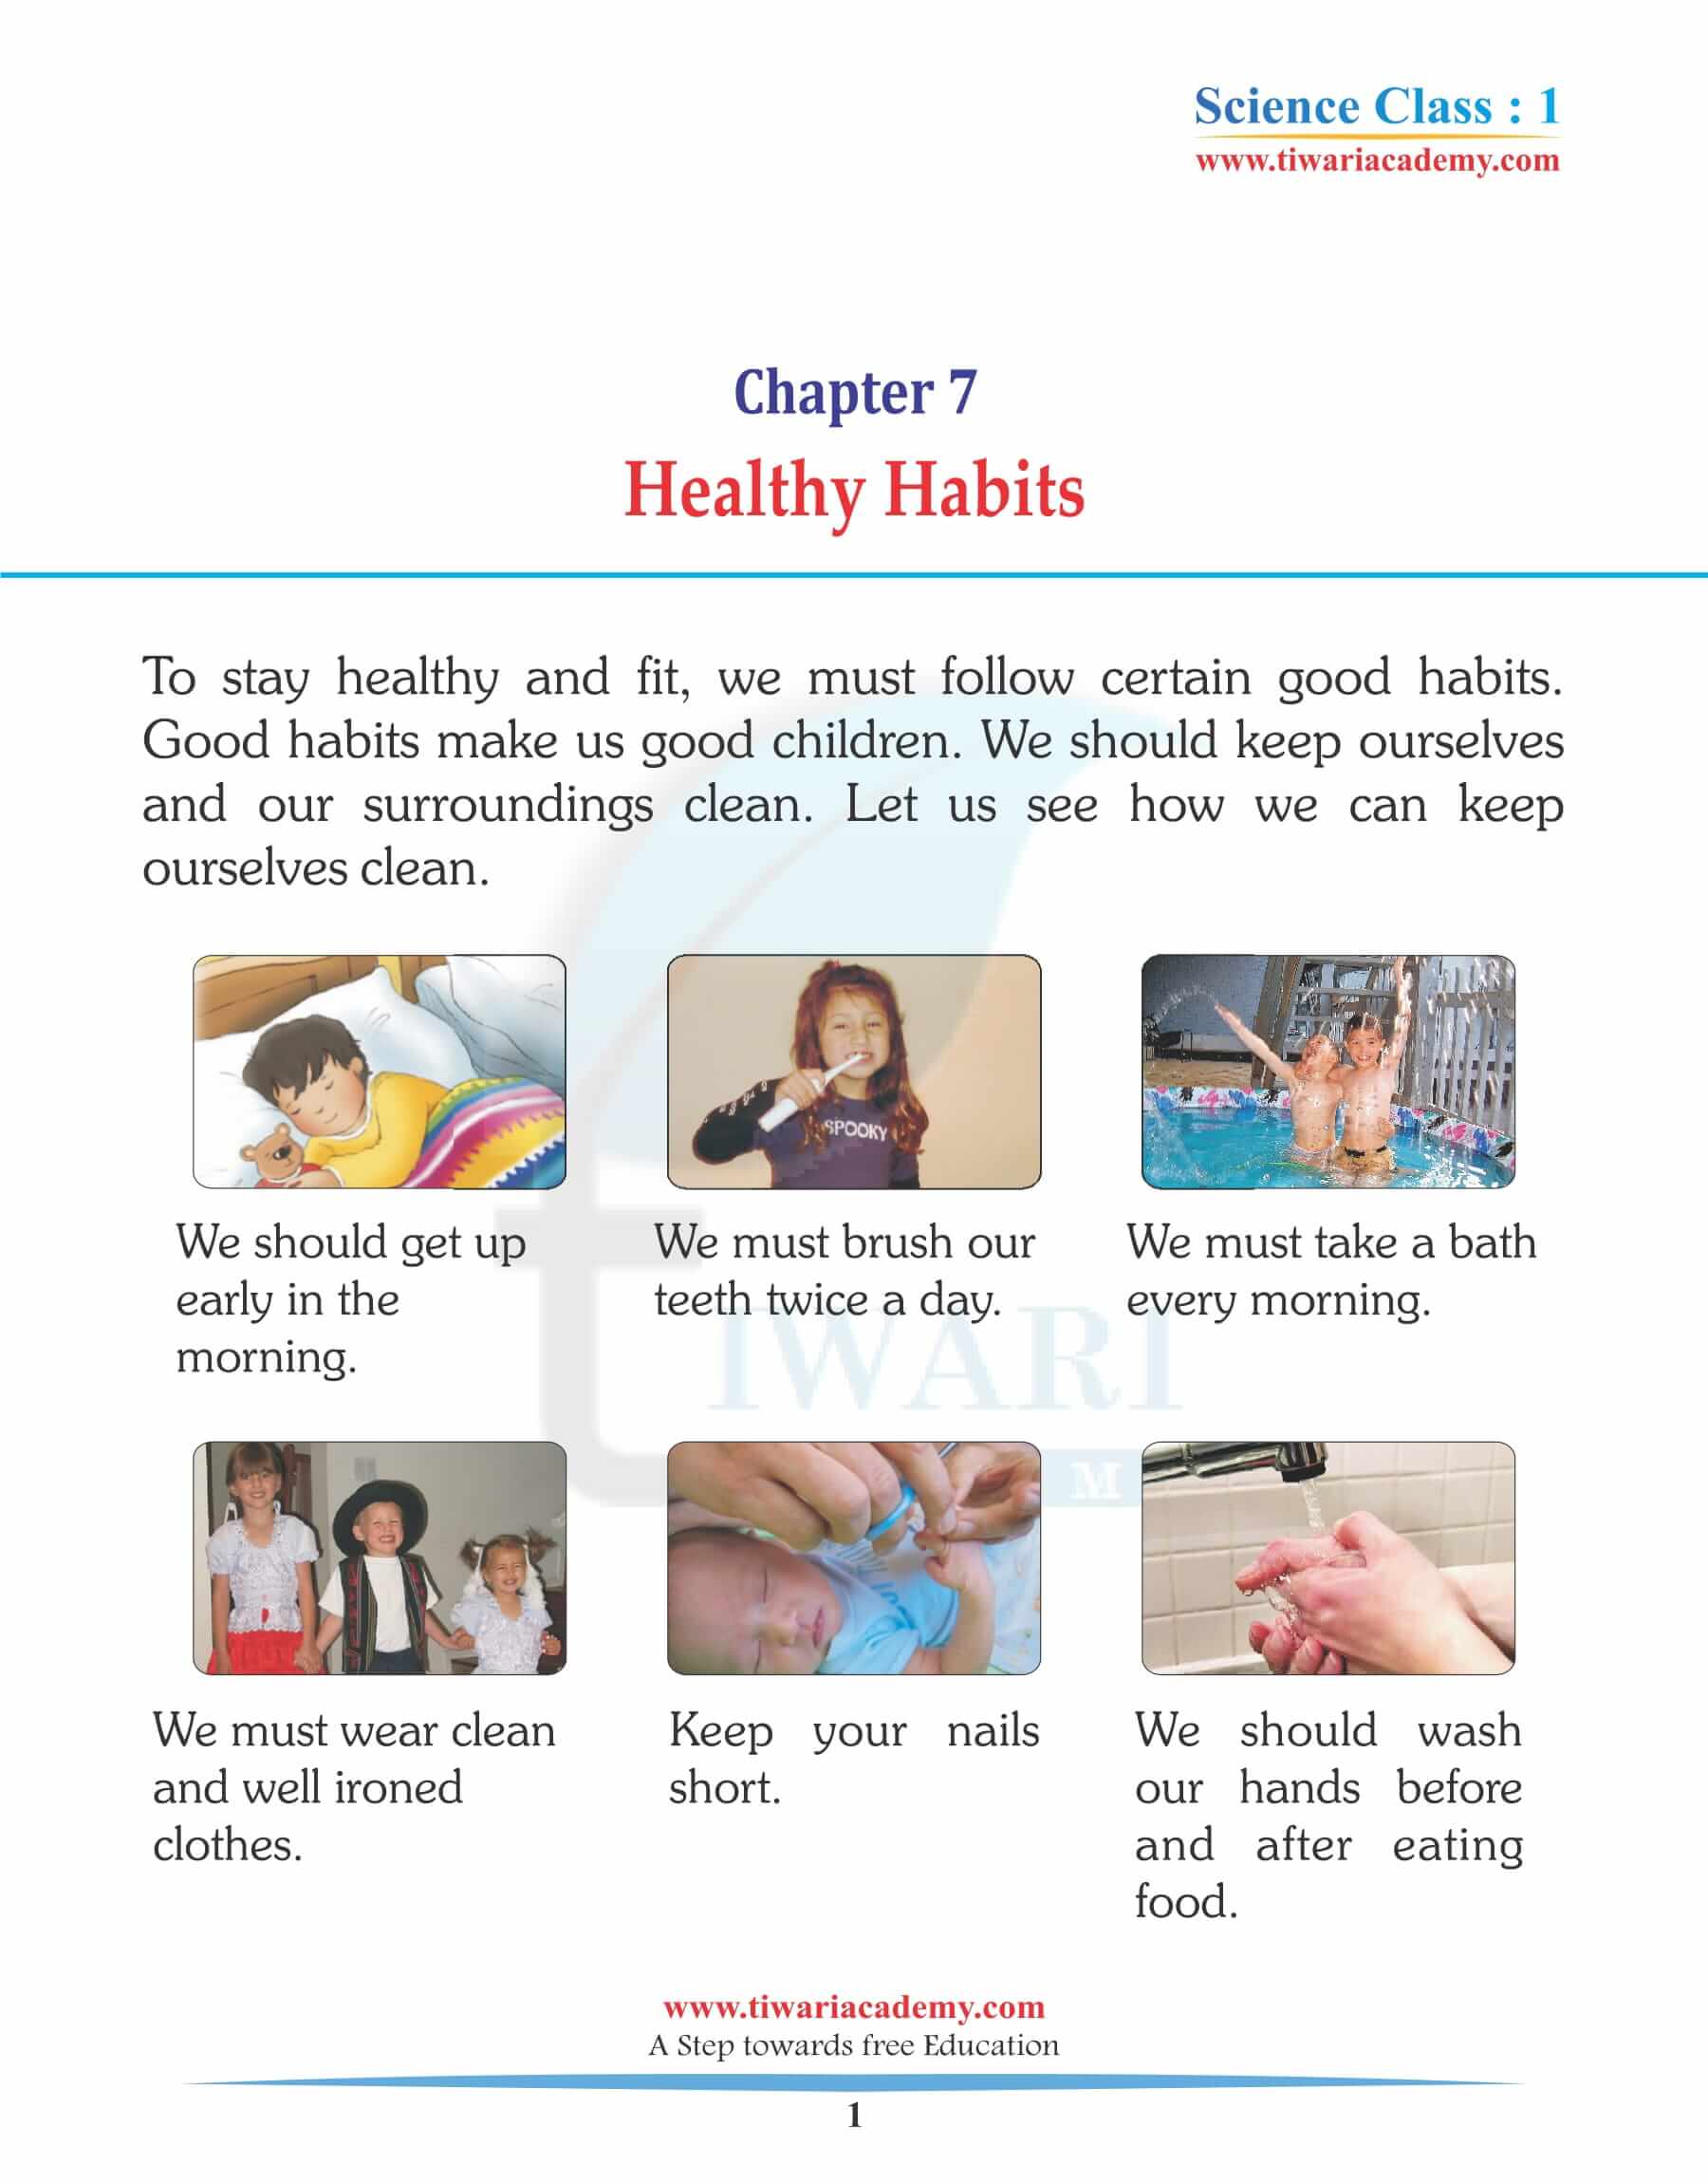 healthy eating habits essay for class 1